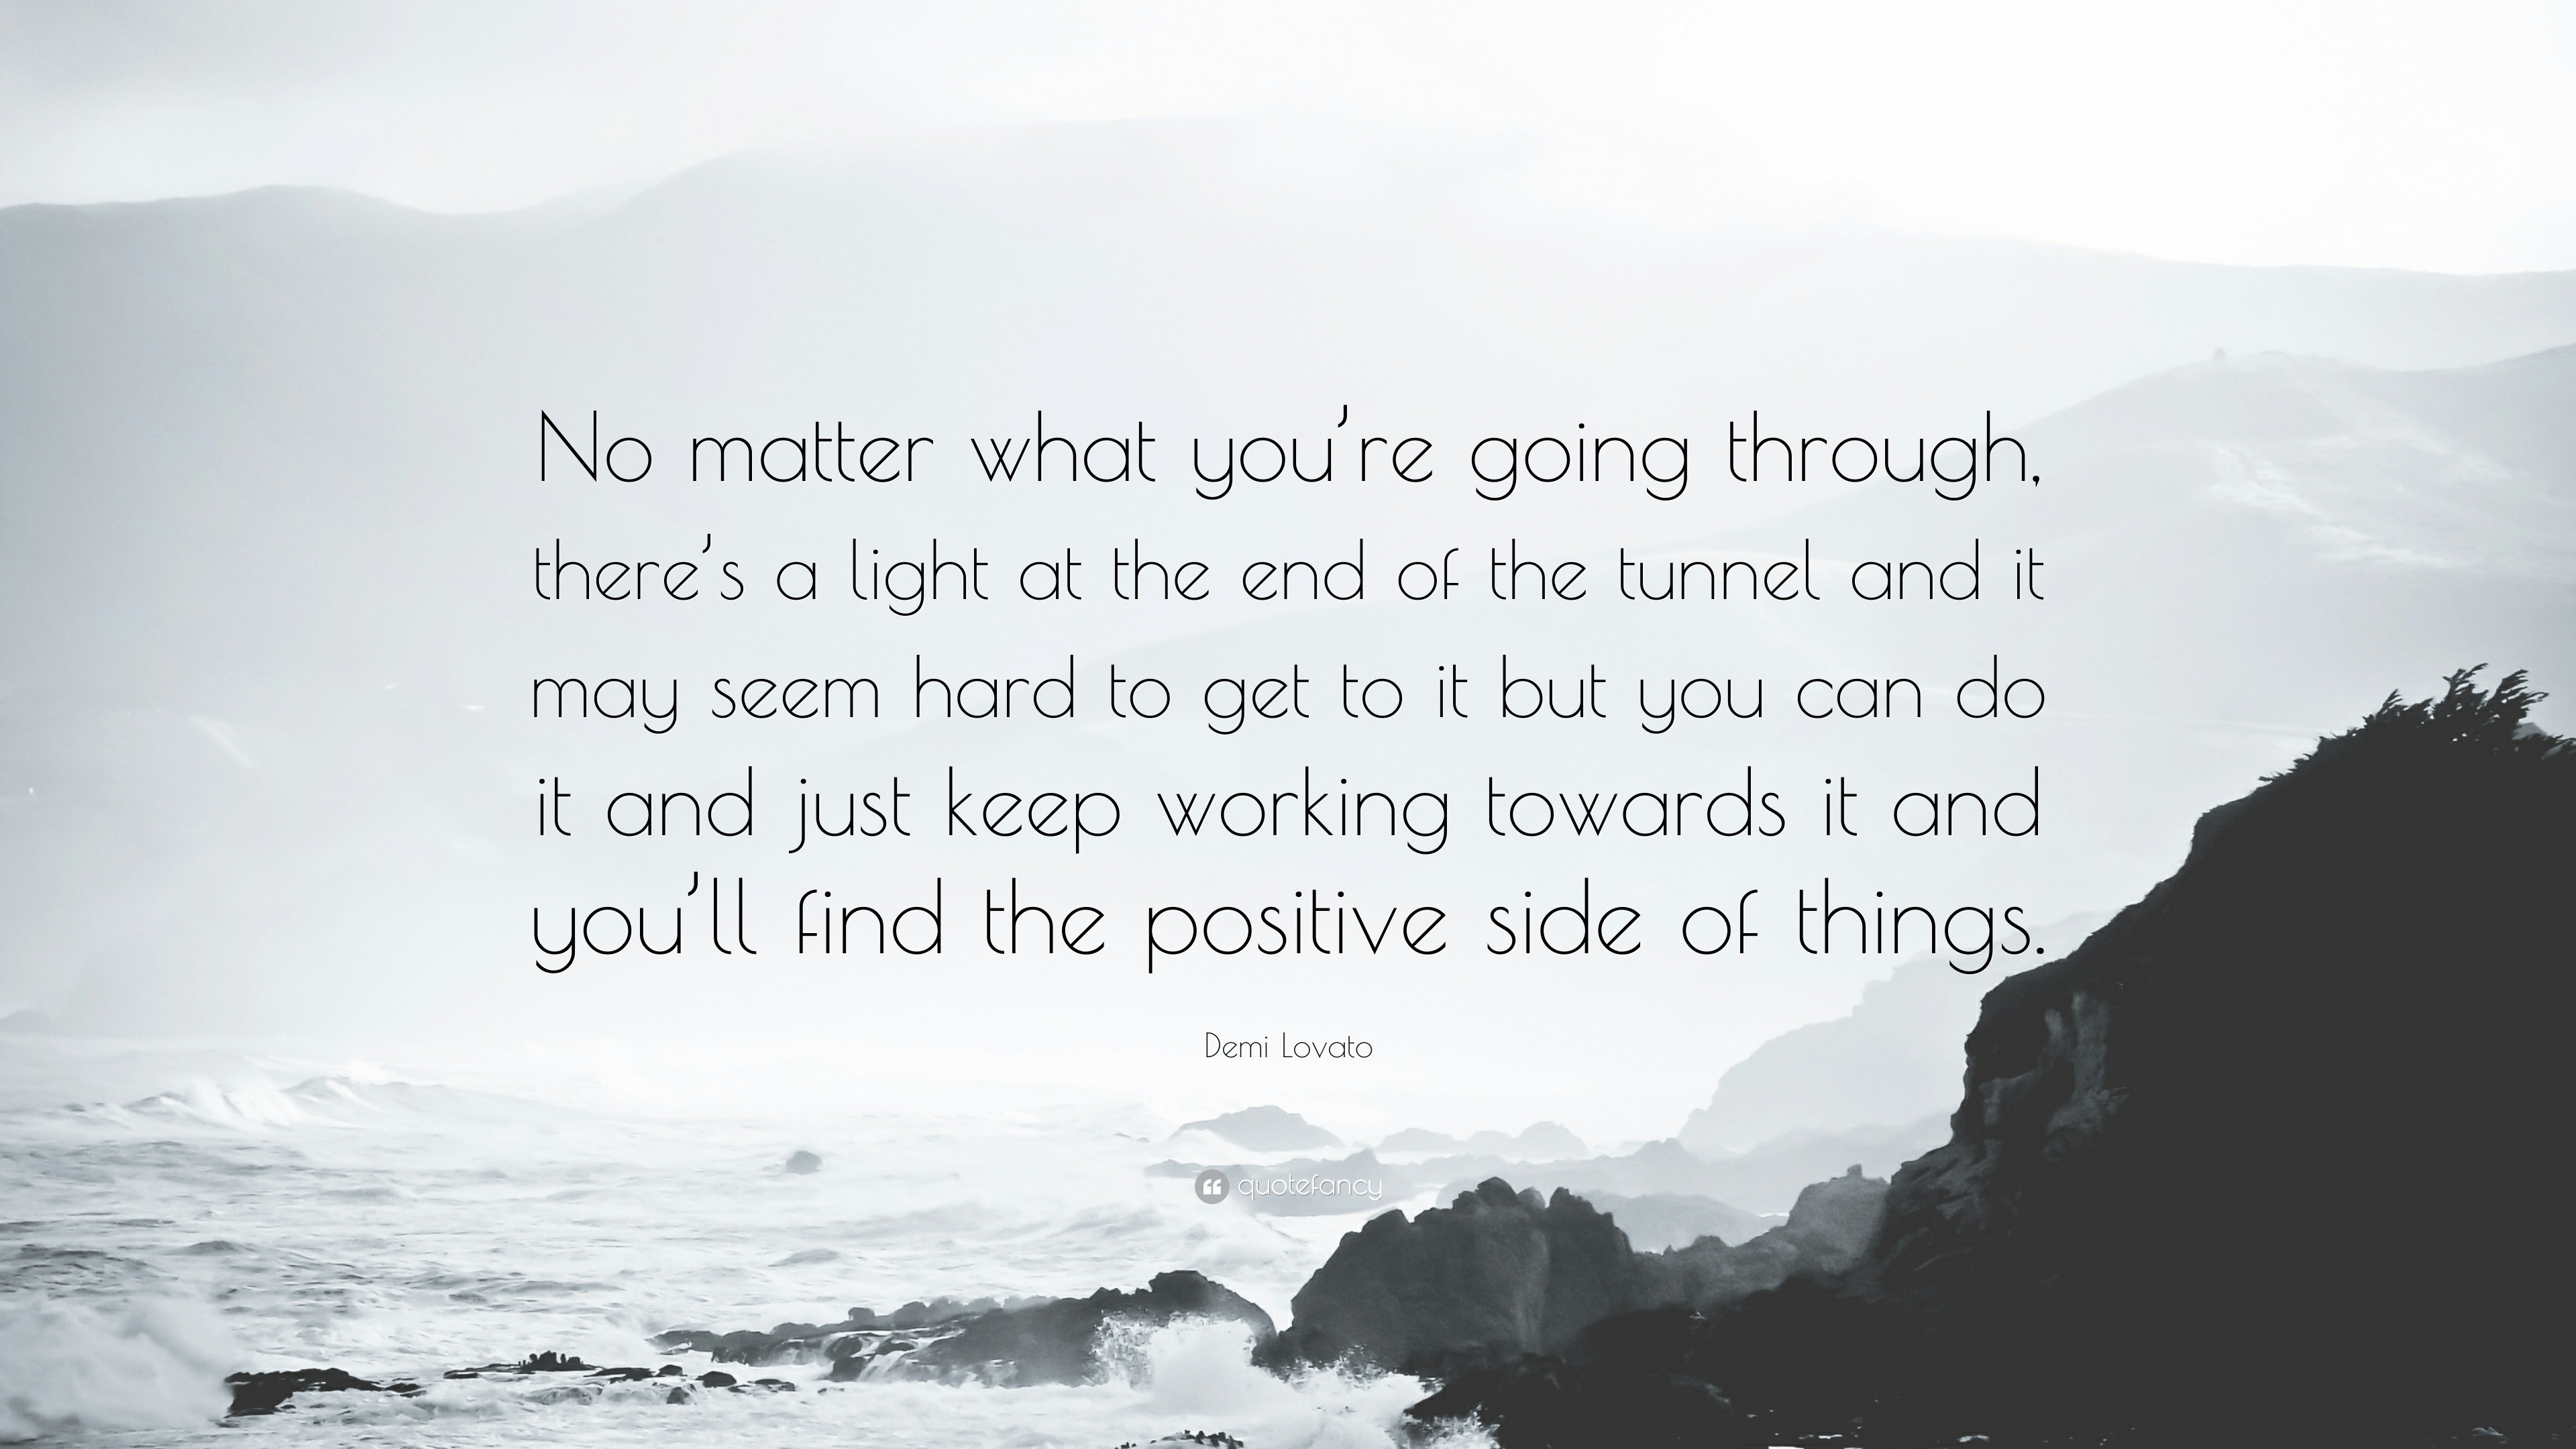 Demi Lovato Quote: "No matter what you're going through ...